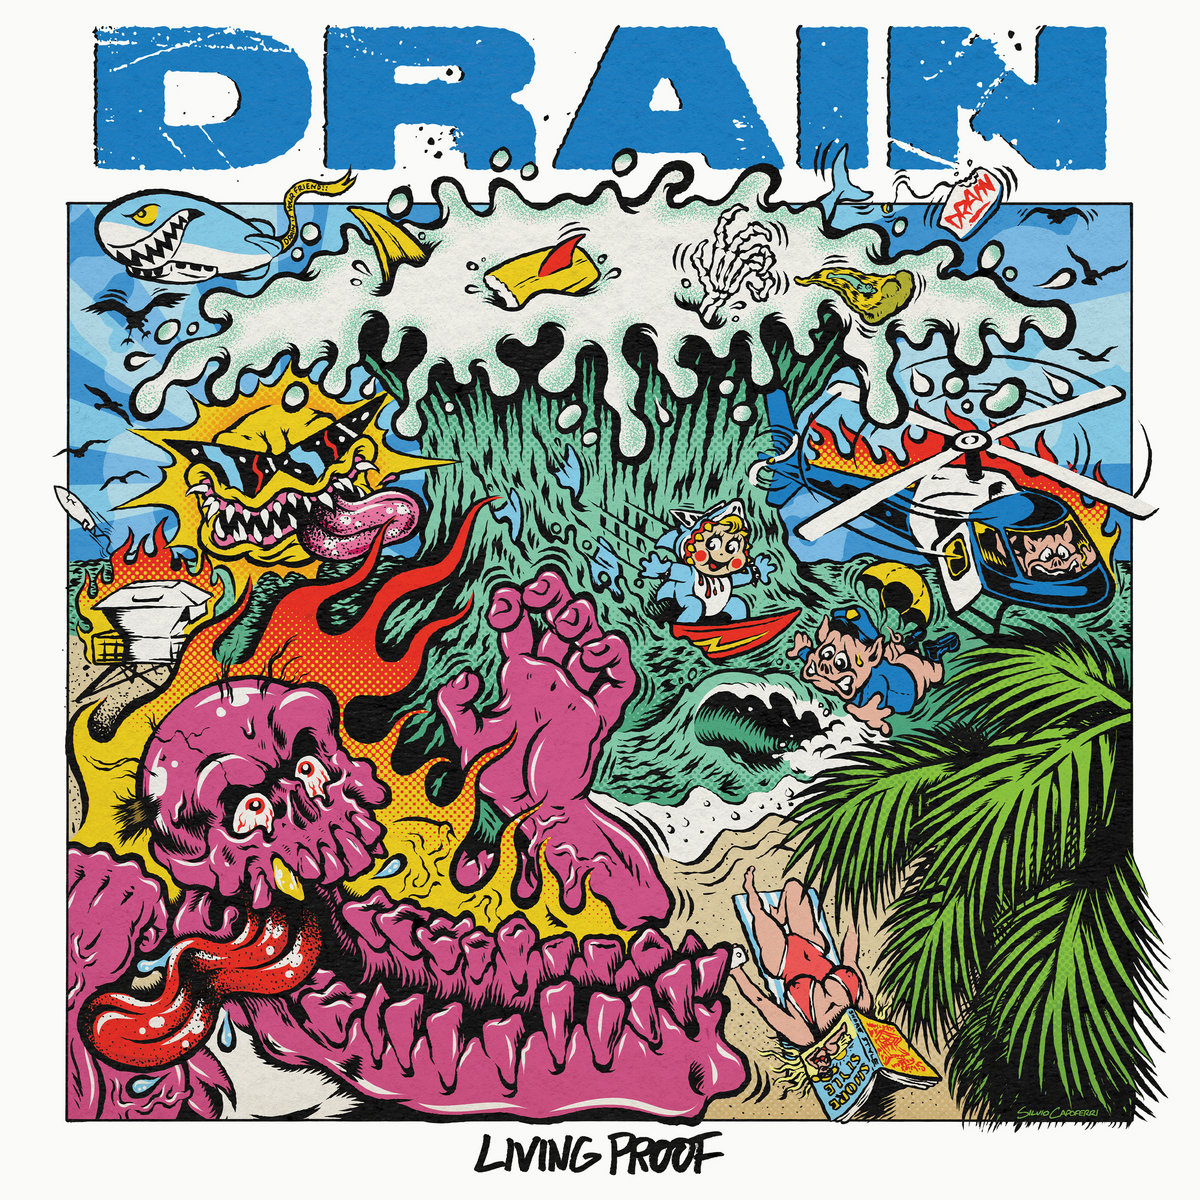 Artwork for "Living Proof" by Drain